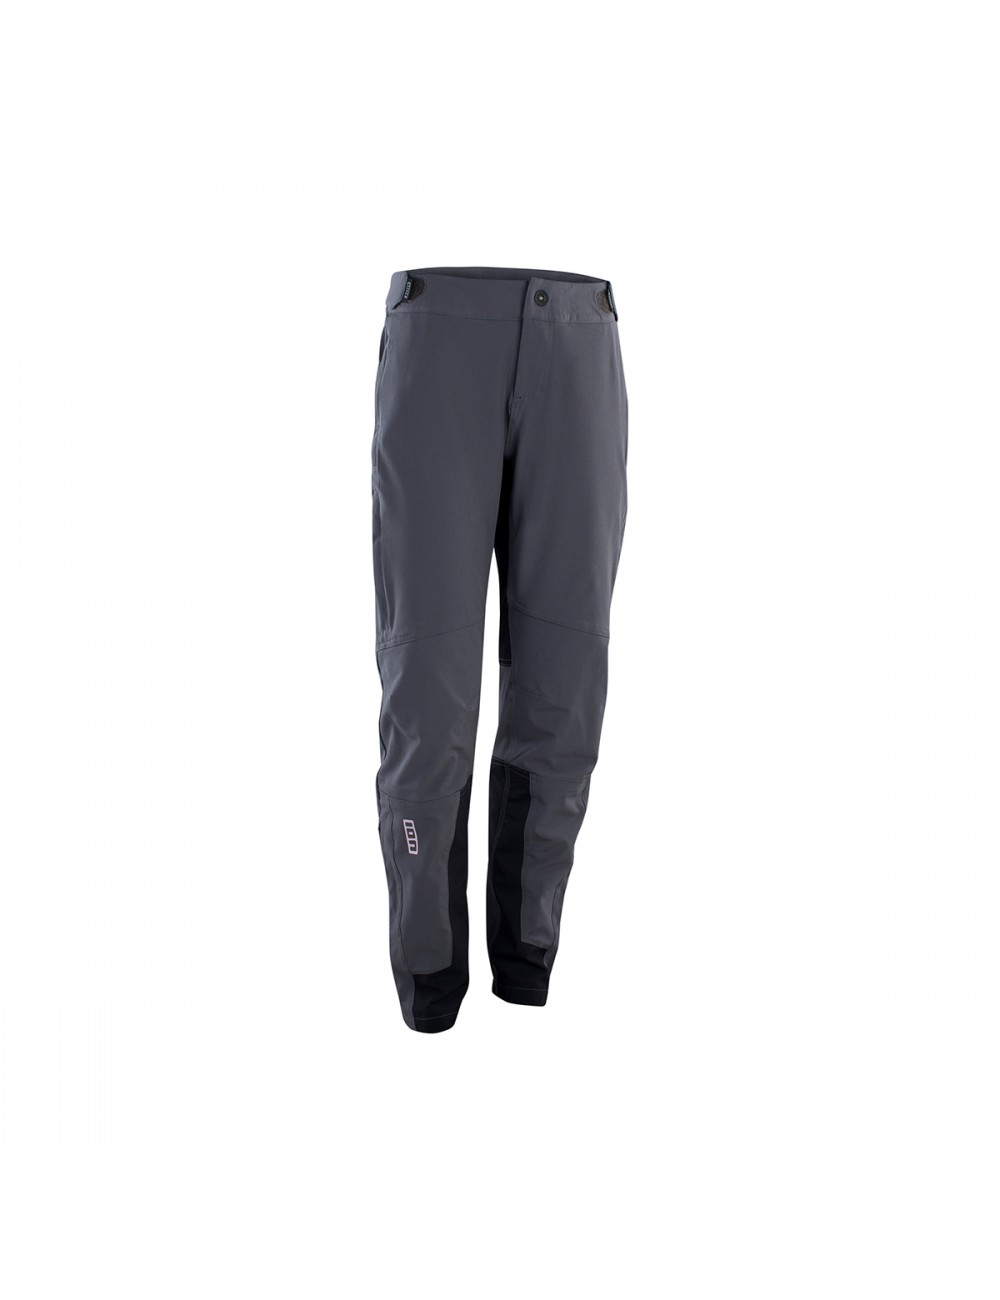 ION Wms Outerwear Shelter Pants - Grey